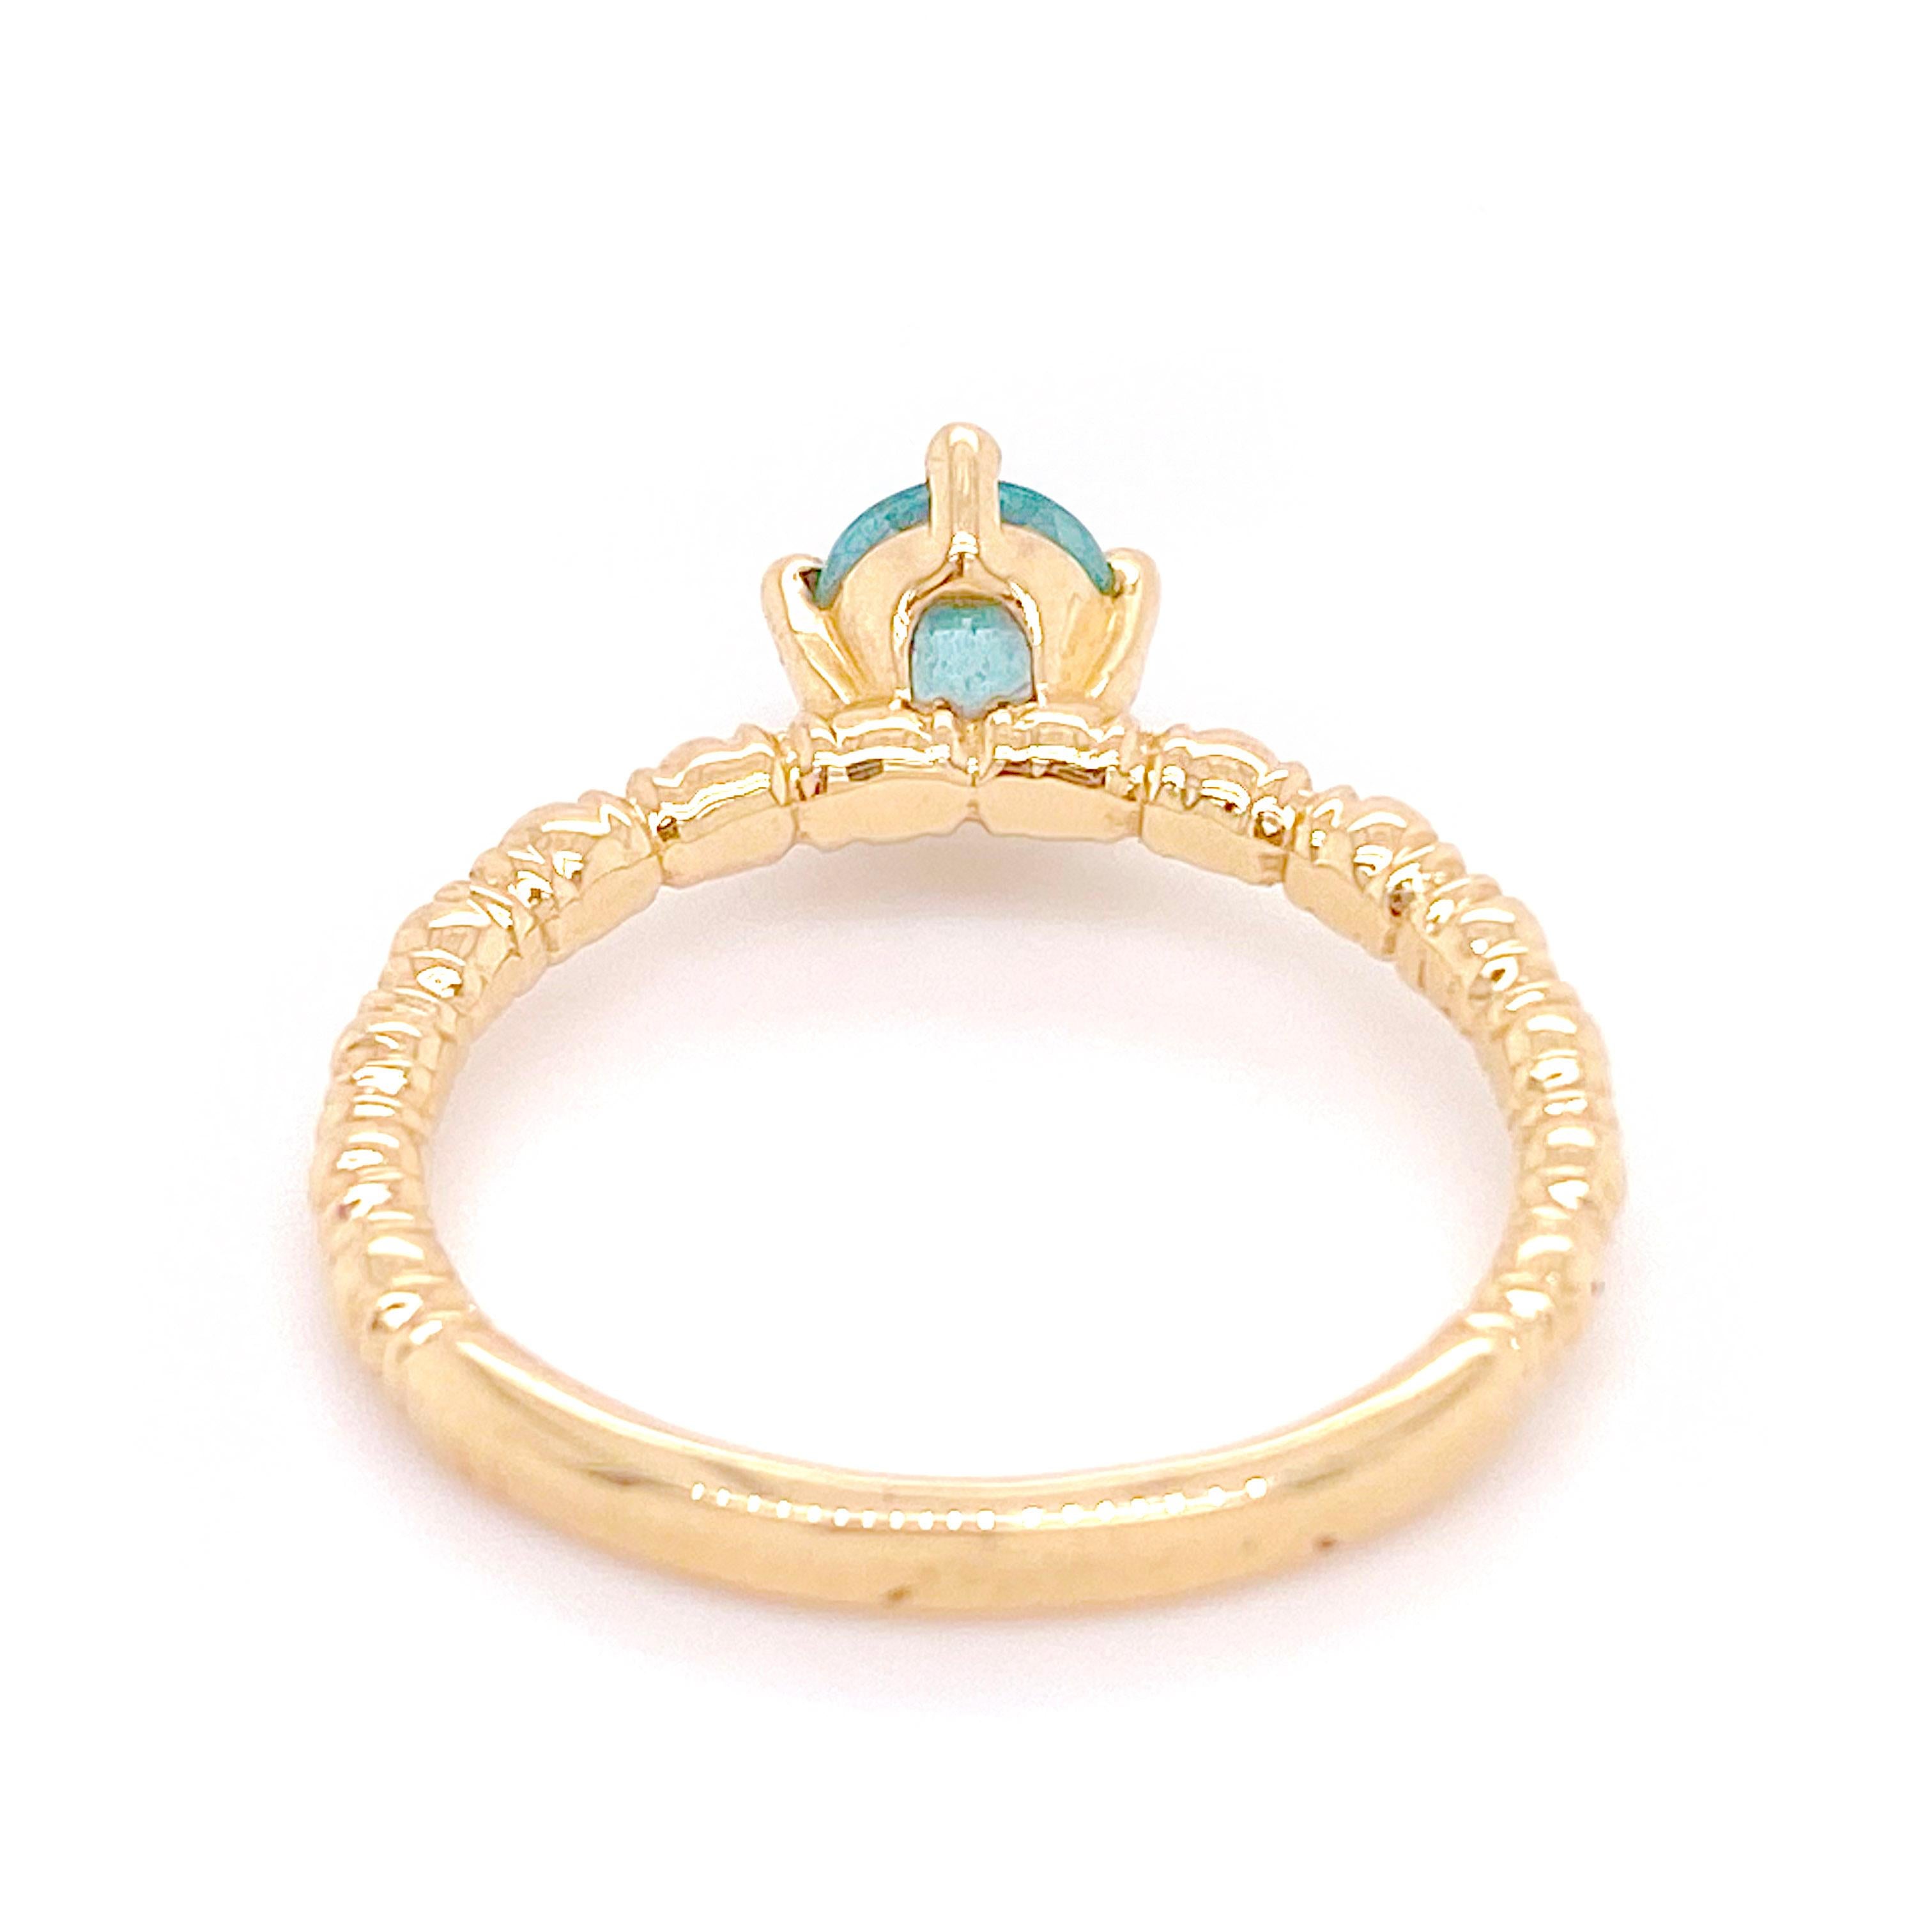 Contemporary Solitaire Apatite Ring, Yellow Gold, Textured Band with Genuine Vibrant Apatite For Sale